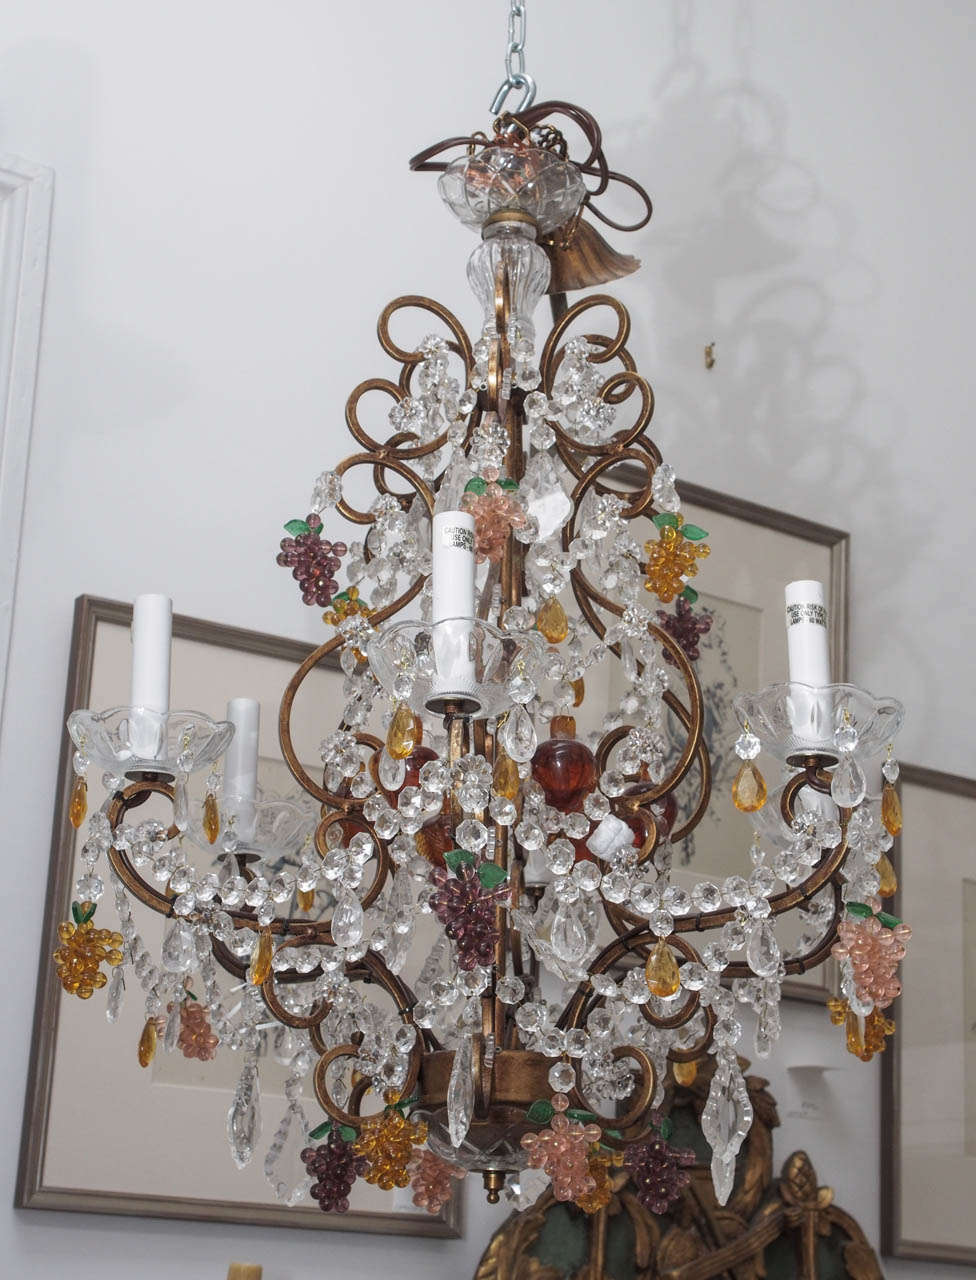 Playful crystal chandelier with purple, pink, and gold crystal grapes.